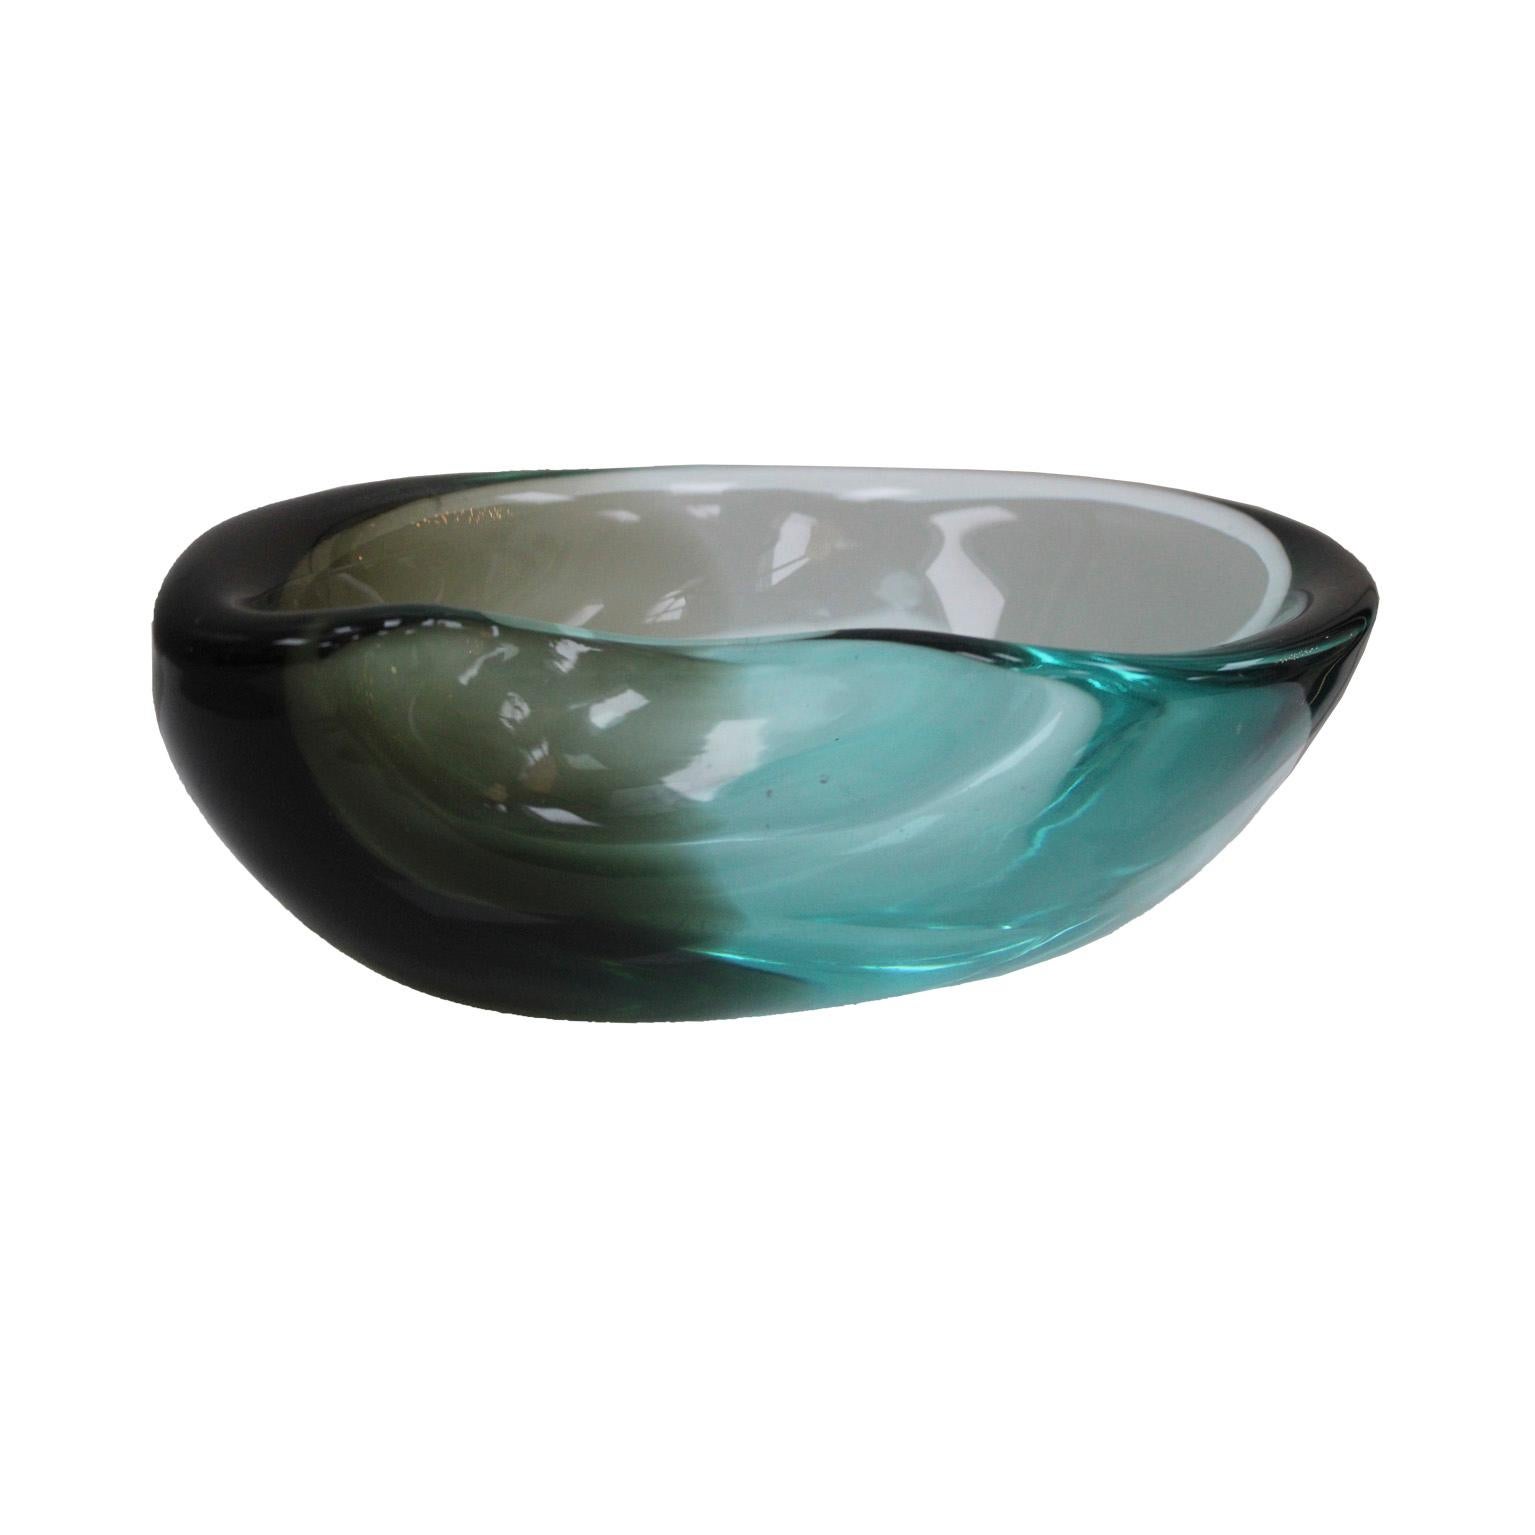 Italian bowl designed in the 1970s, handmade in Murano glass. Signature engraved on the bottom. 

Every item LA Studio offers is checked by our team of 10 craftsmen in our in-house workshop. Special restoration or reupholstery requests can be done.